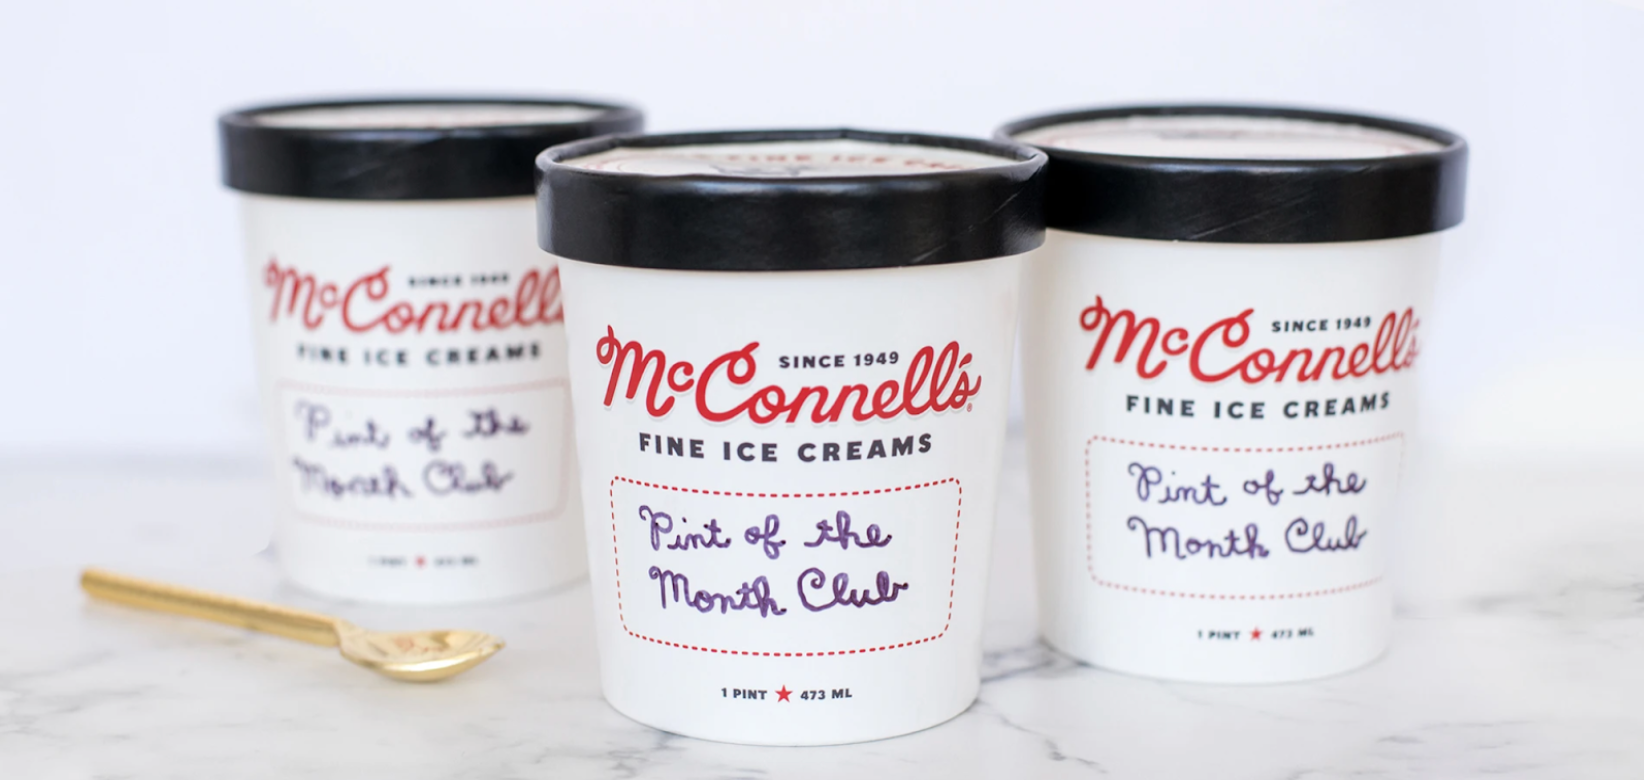 McConnell's Ice Cream 